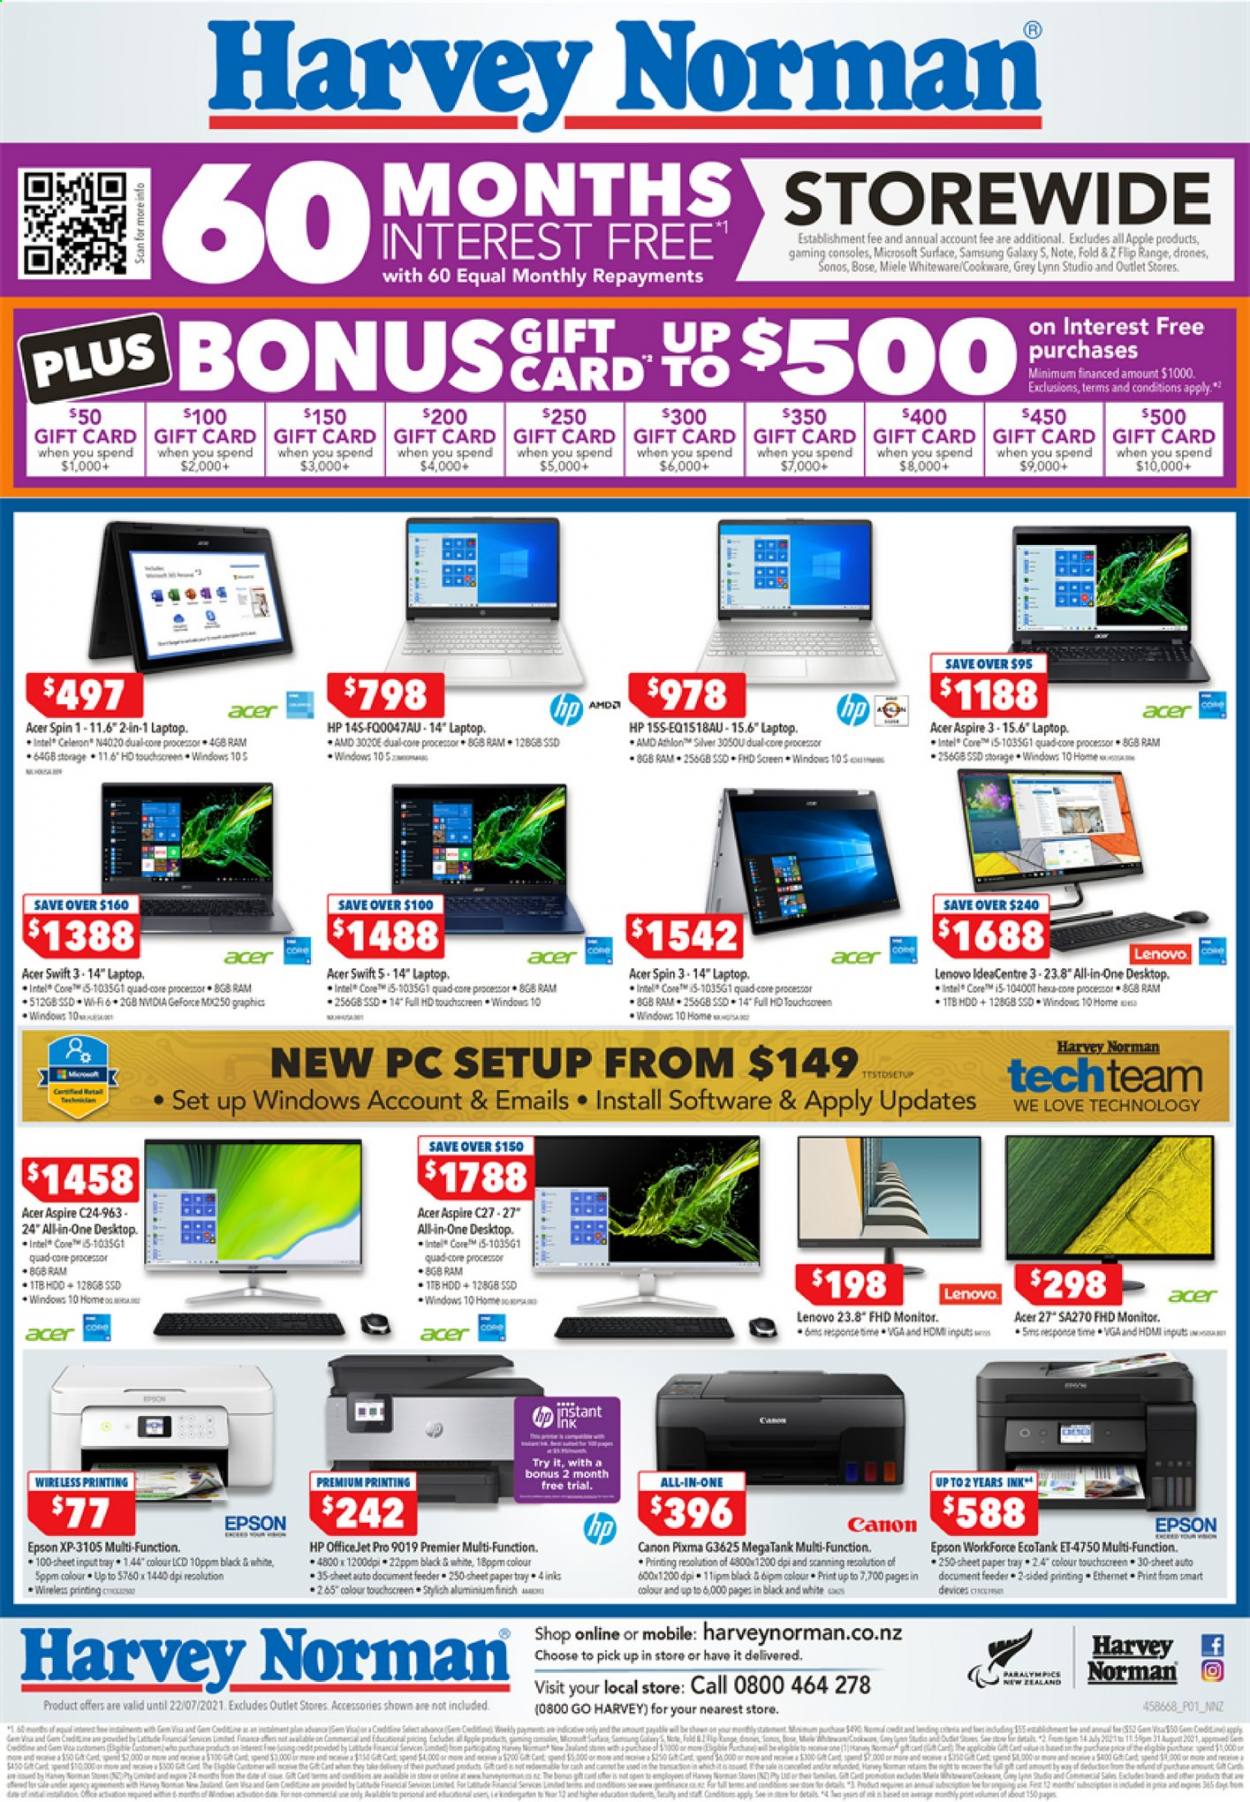 thumbnail - Harvey Norman mailer - 17.07.2021 - 22.07.2021 - Sales products - Apple, Intel, Acer, Lenovo, Hewlett Packard, Samsung Galaxy, drone, Samsung, laptop, GeForce, Athlon, monitor, Canon, Sonos, Epson, BOSE, Miele, HP OfficeJet. Page 1.